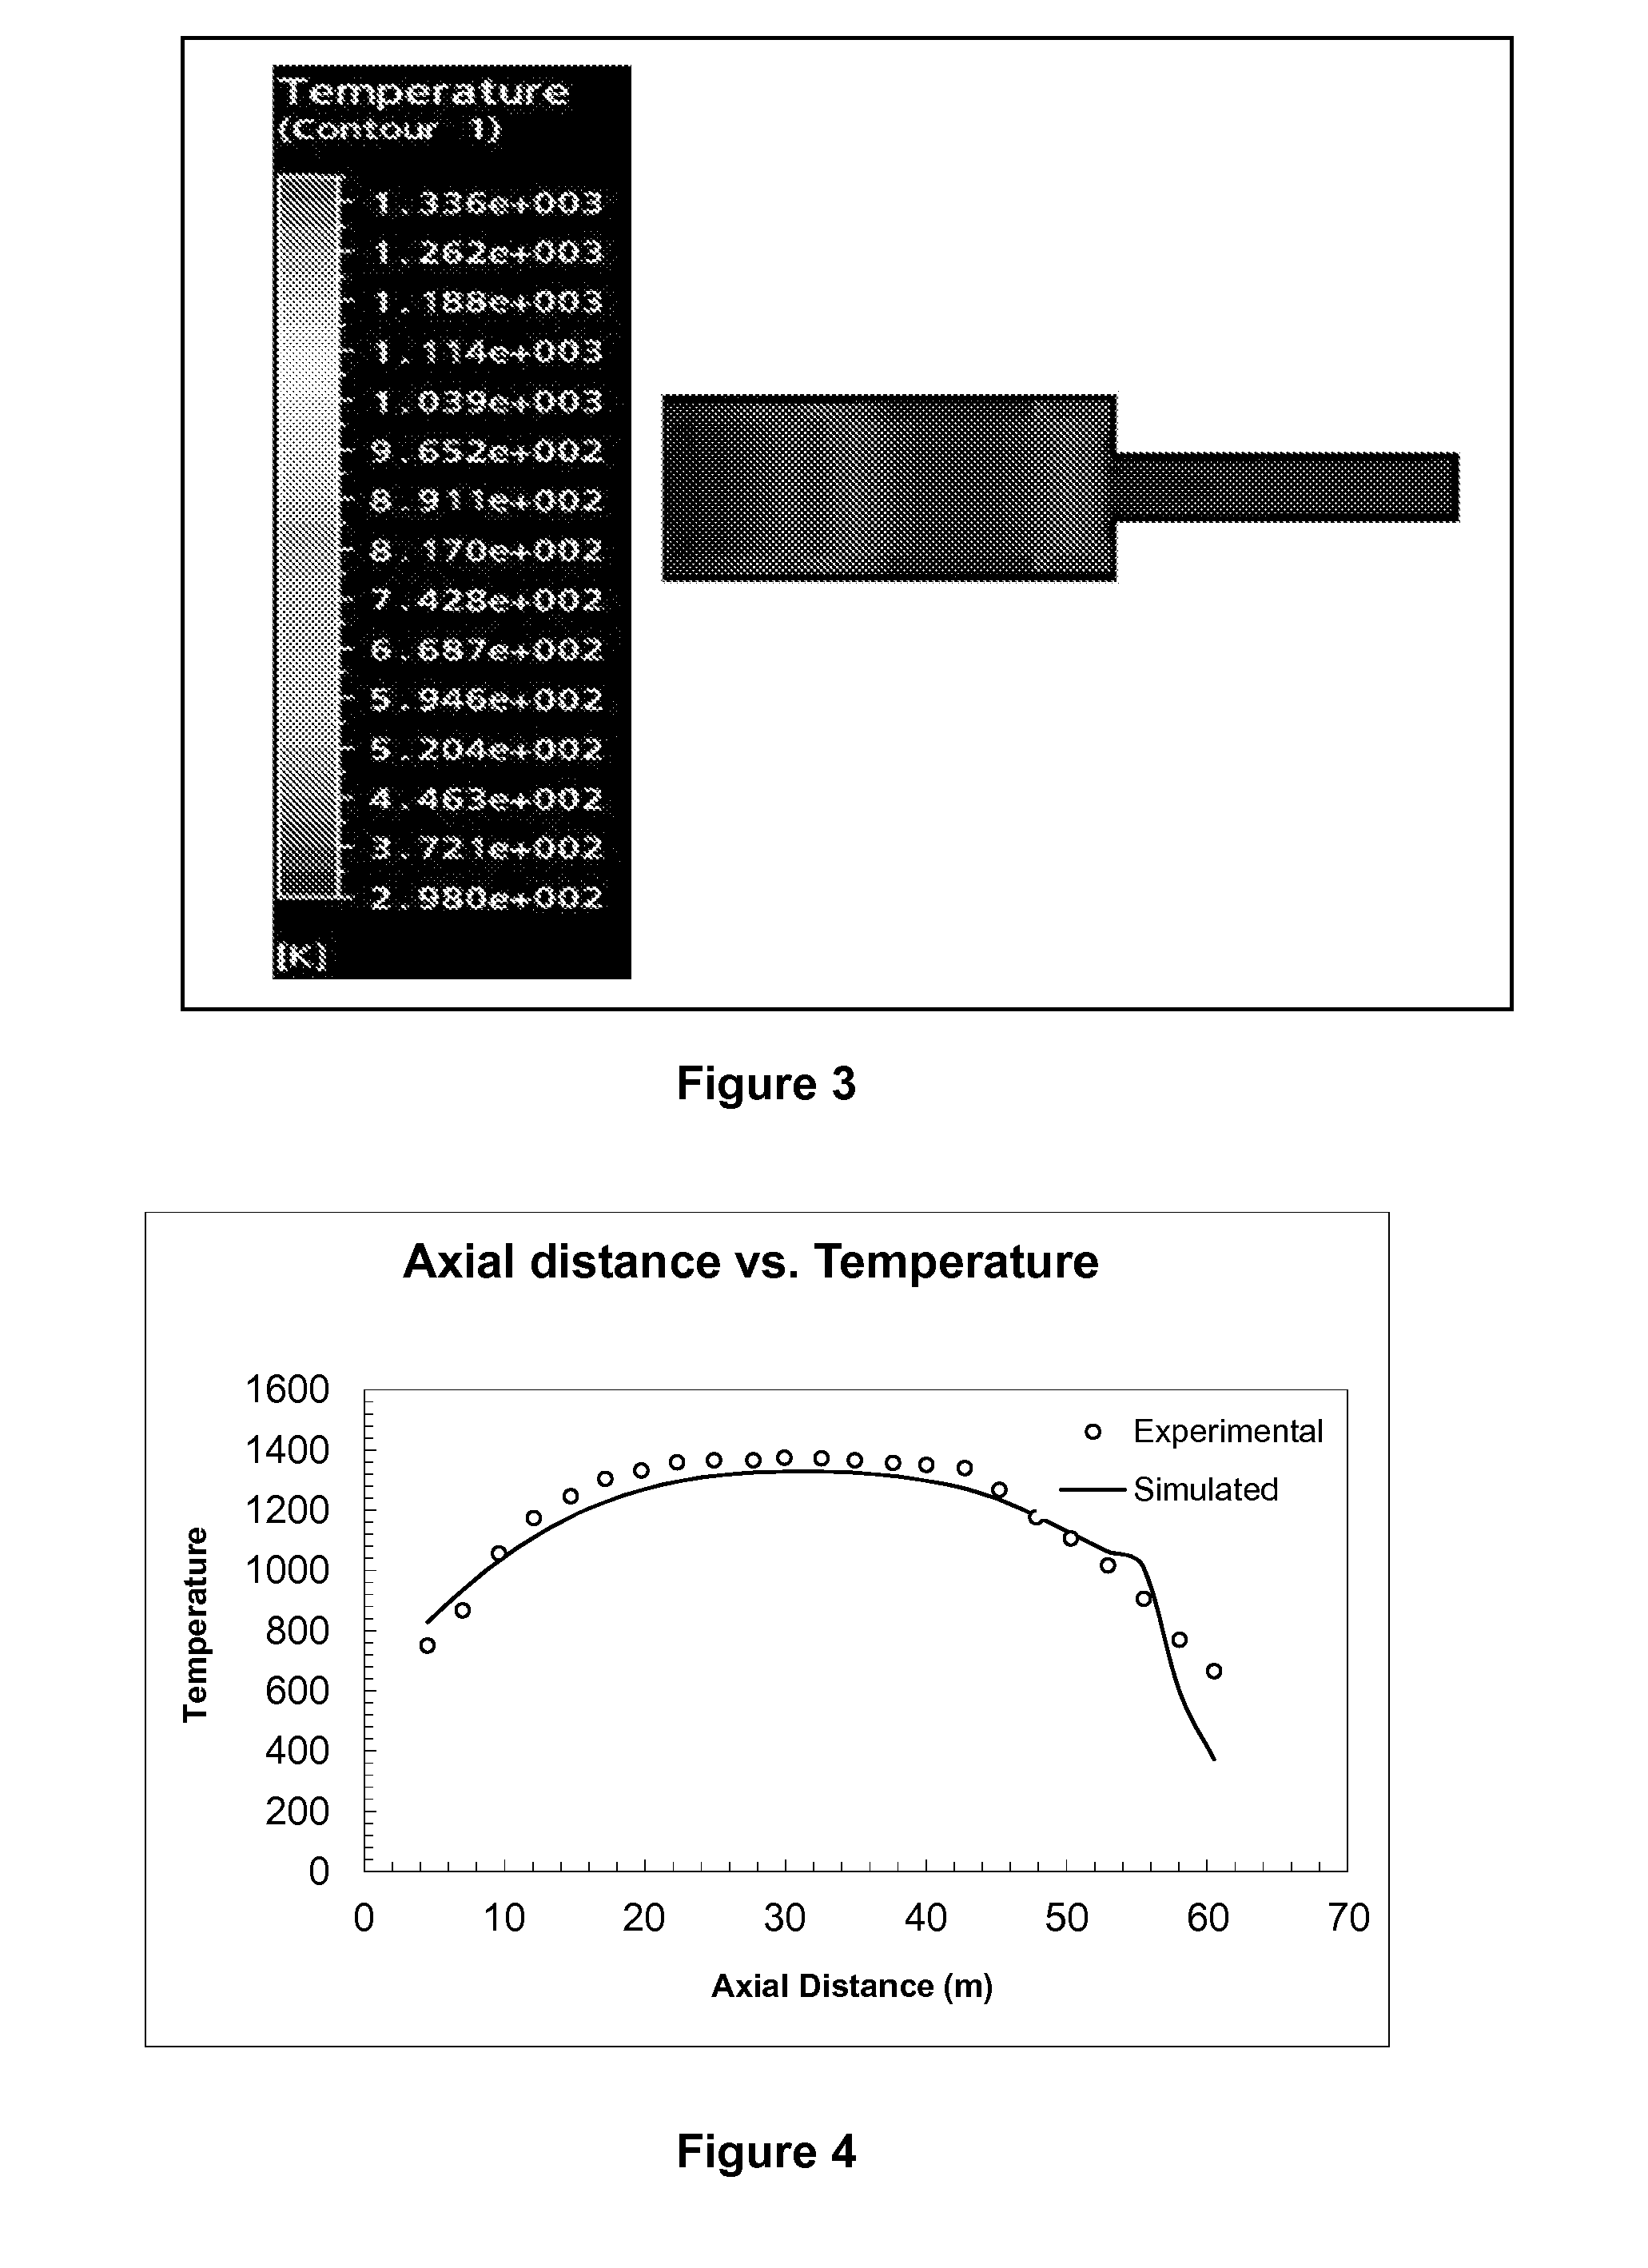 System for optimizing and controlling particle size distribution and production of nanoparticles in furnace reactor